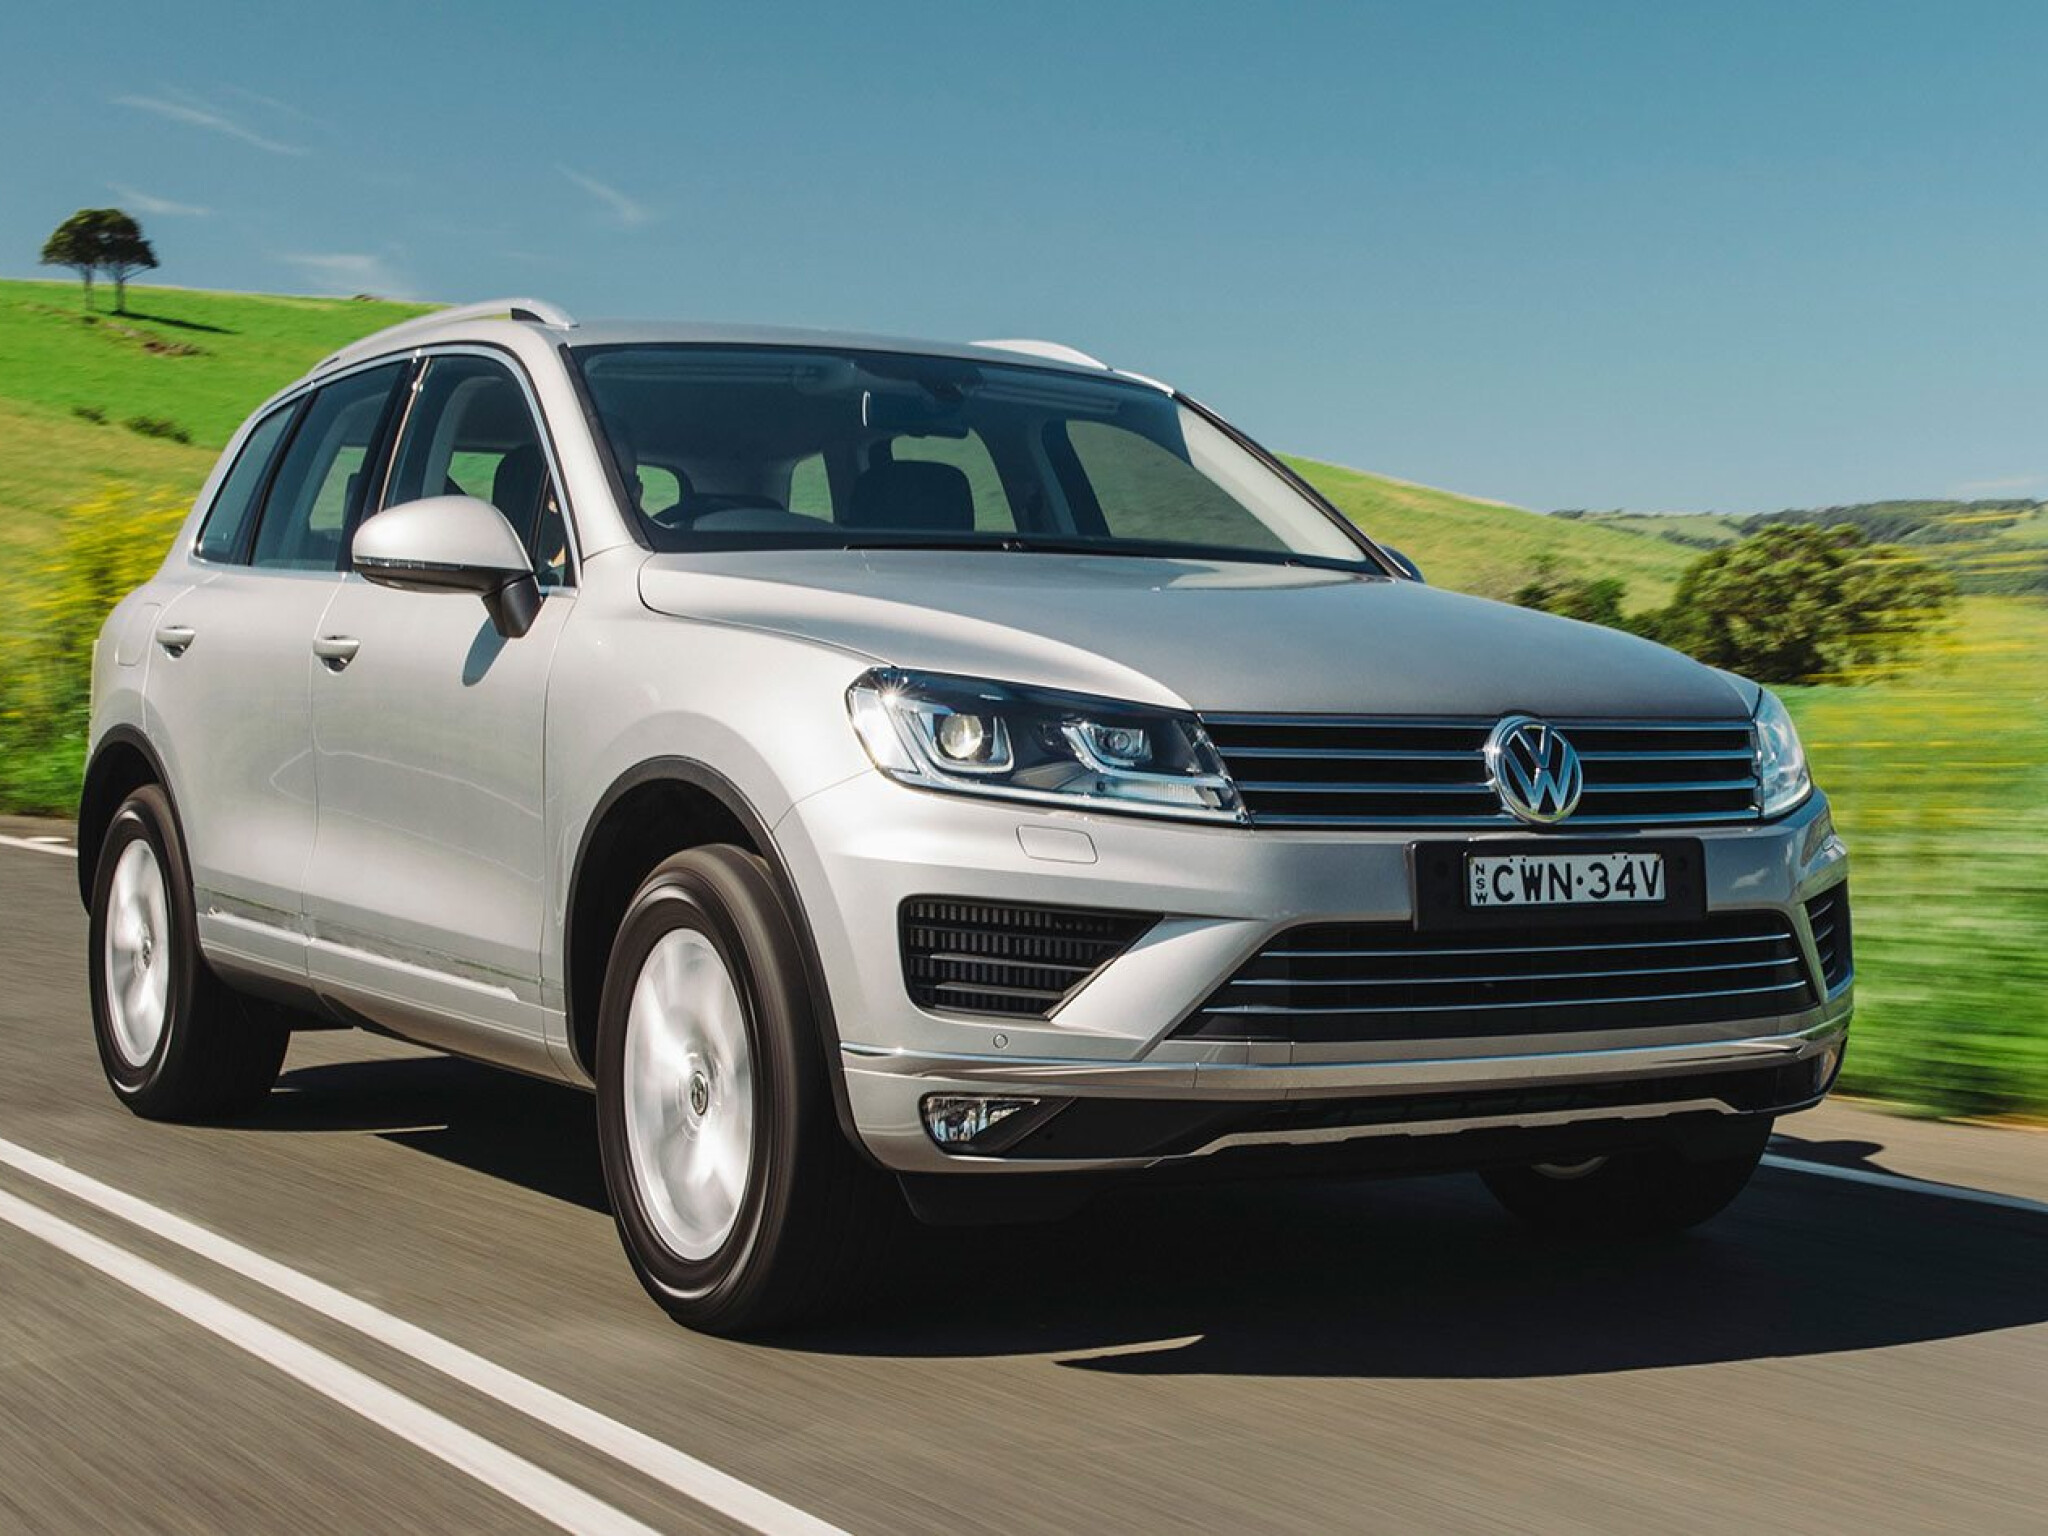 Volkswagen Touareg 2018 Review, Price & Features